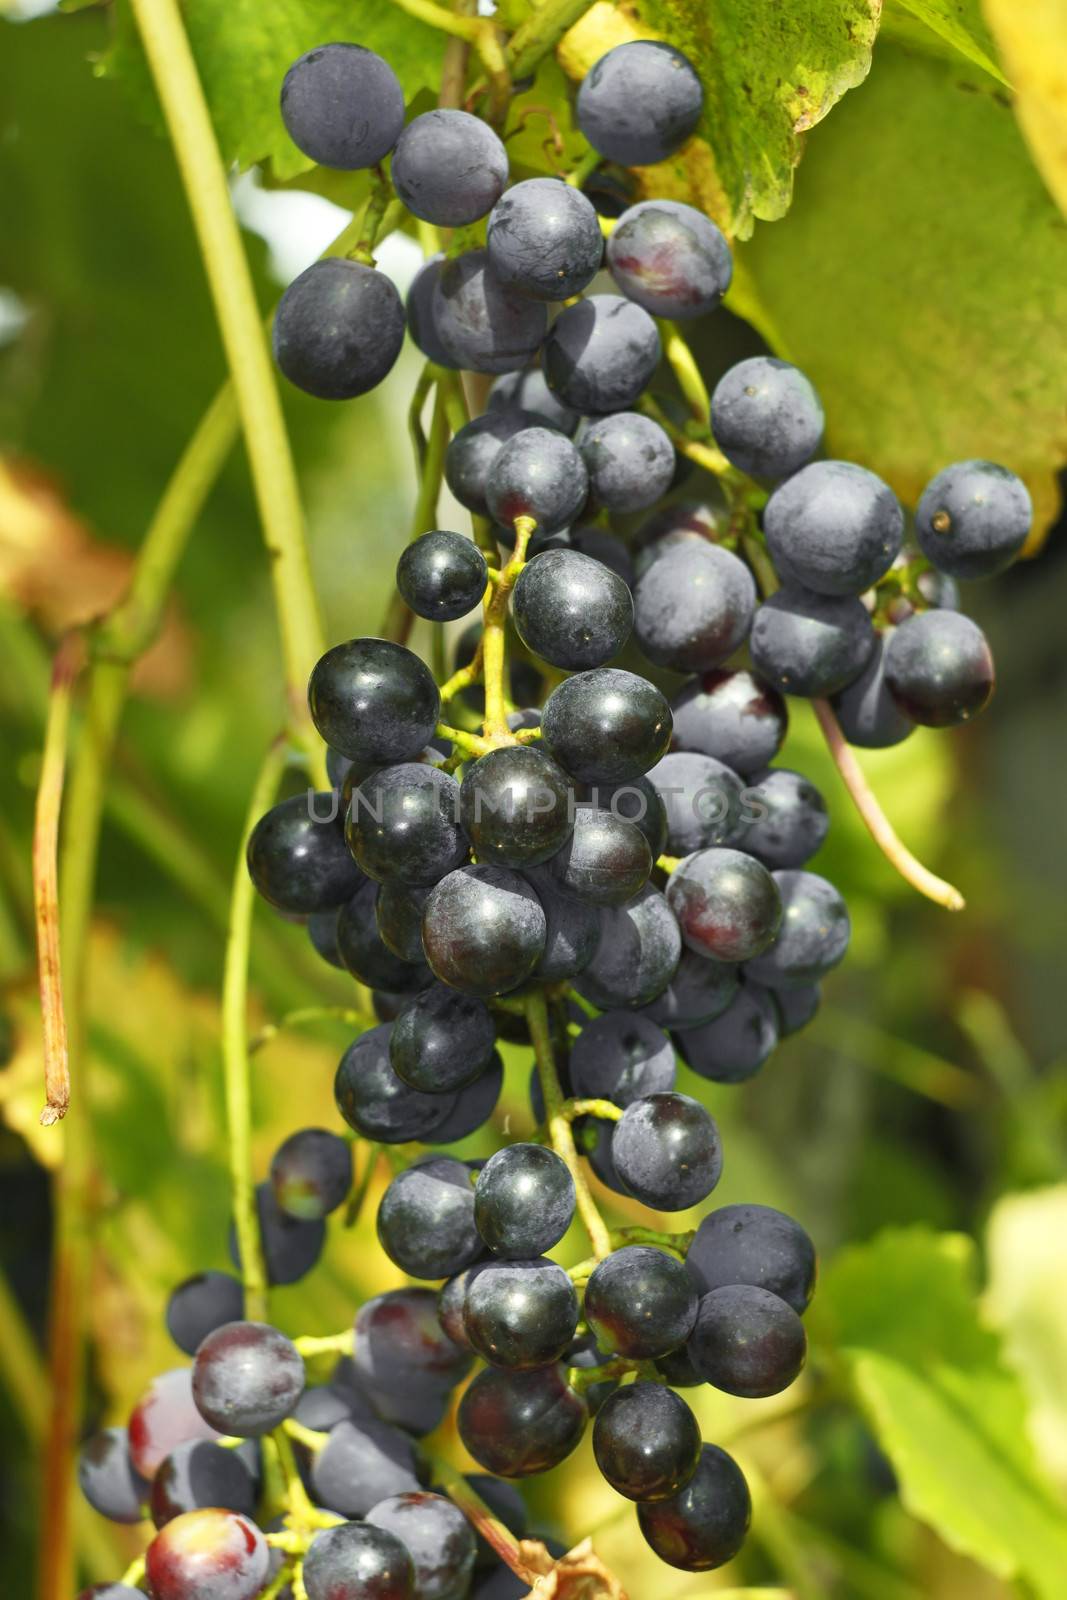 Cluster of dark grapes by qiiip